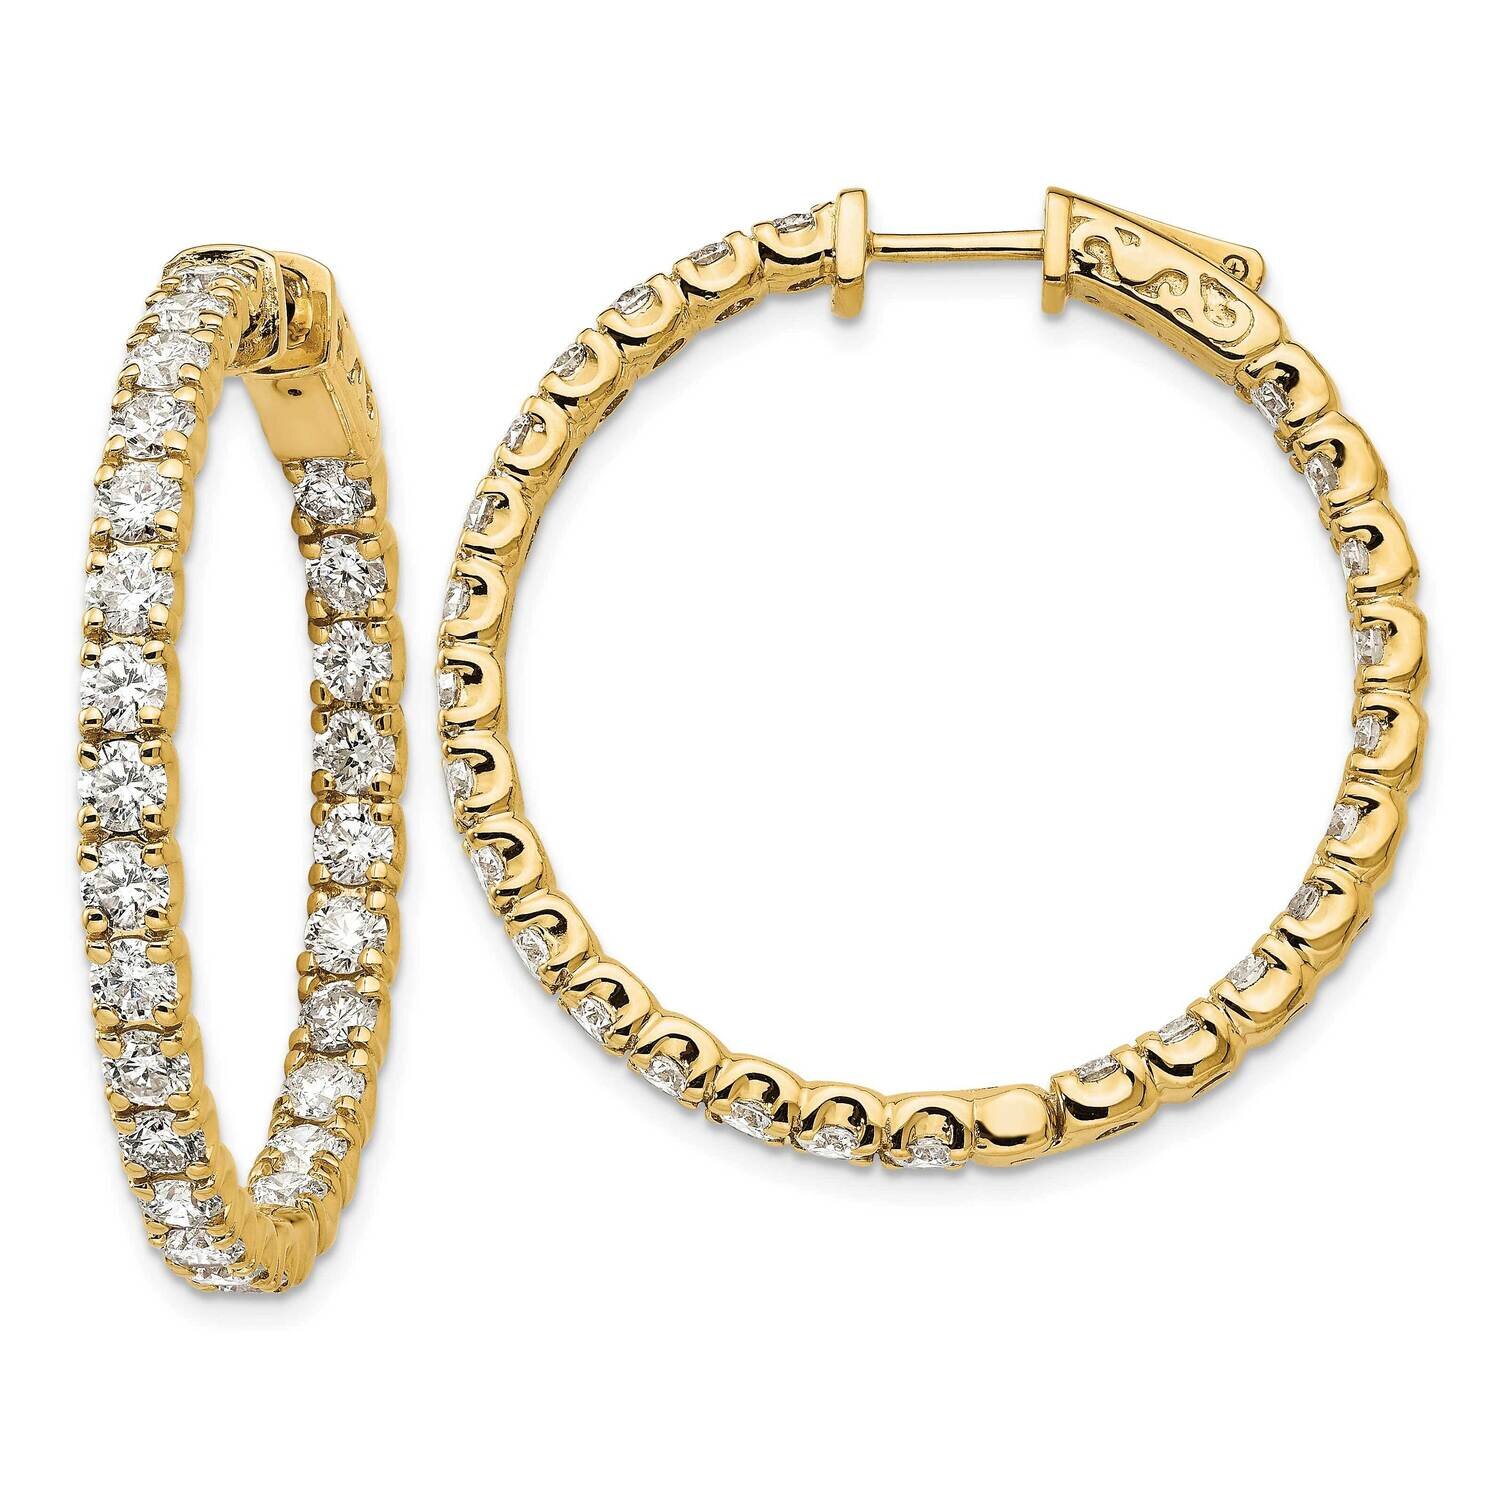 Vs/Si, D E F, Diamond Hoop with Safety Clasp 14k Yellow Gold True Origin Lab Grown XE2017LD